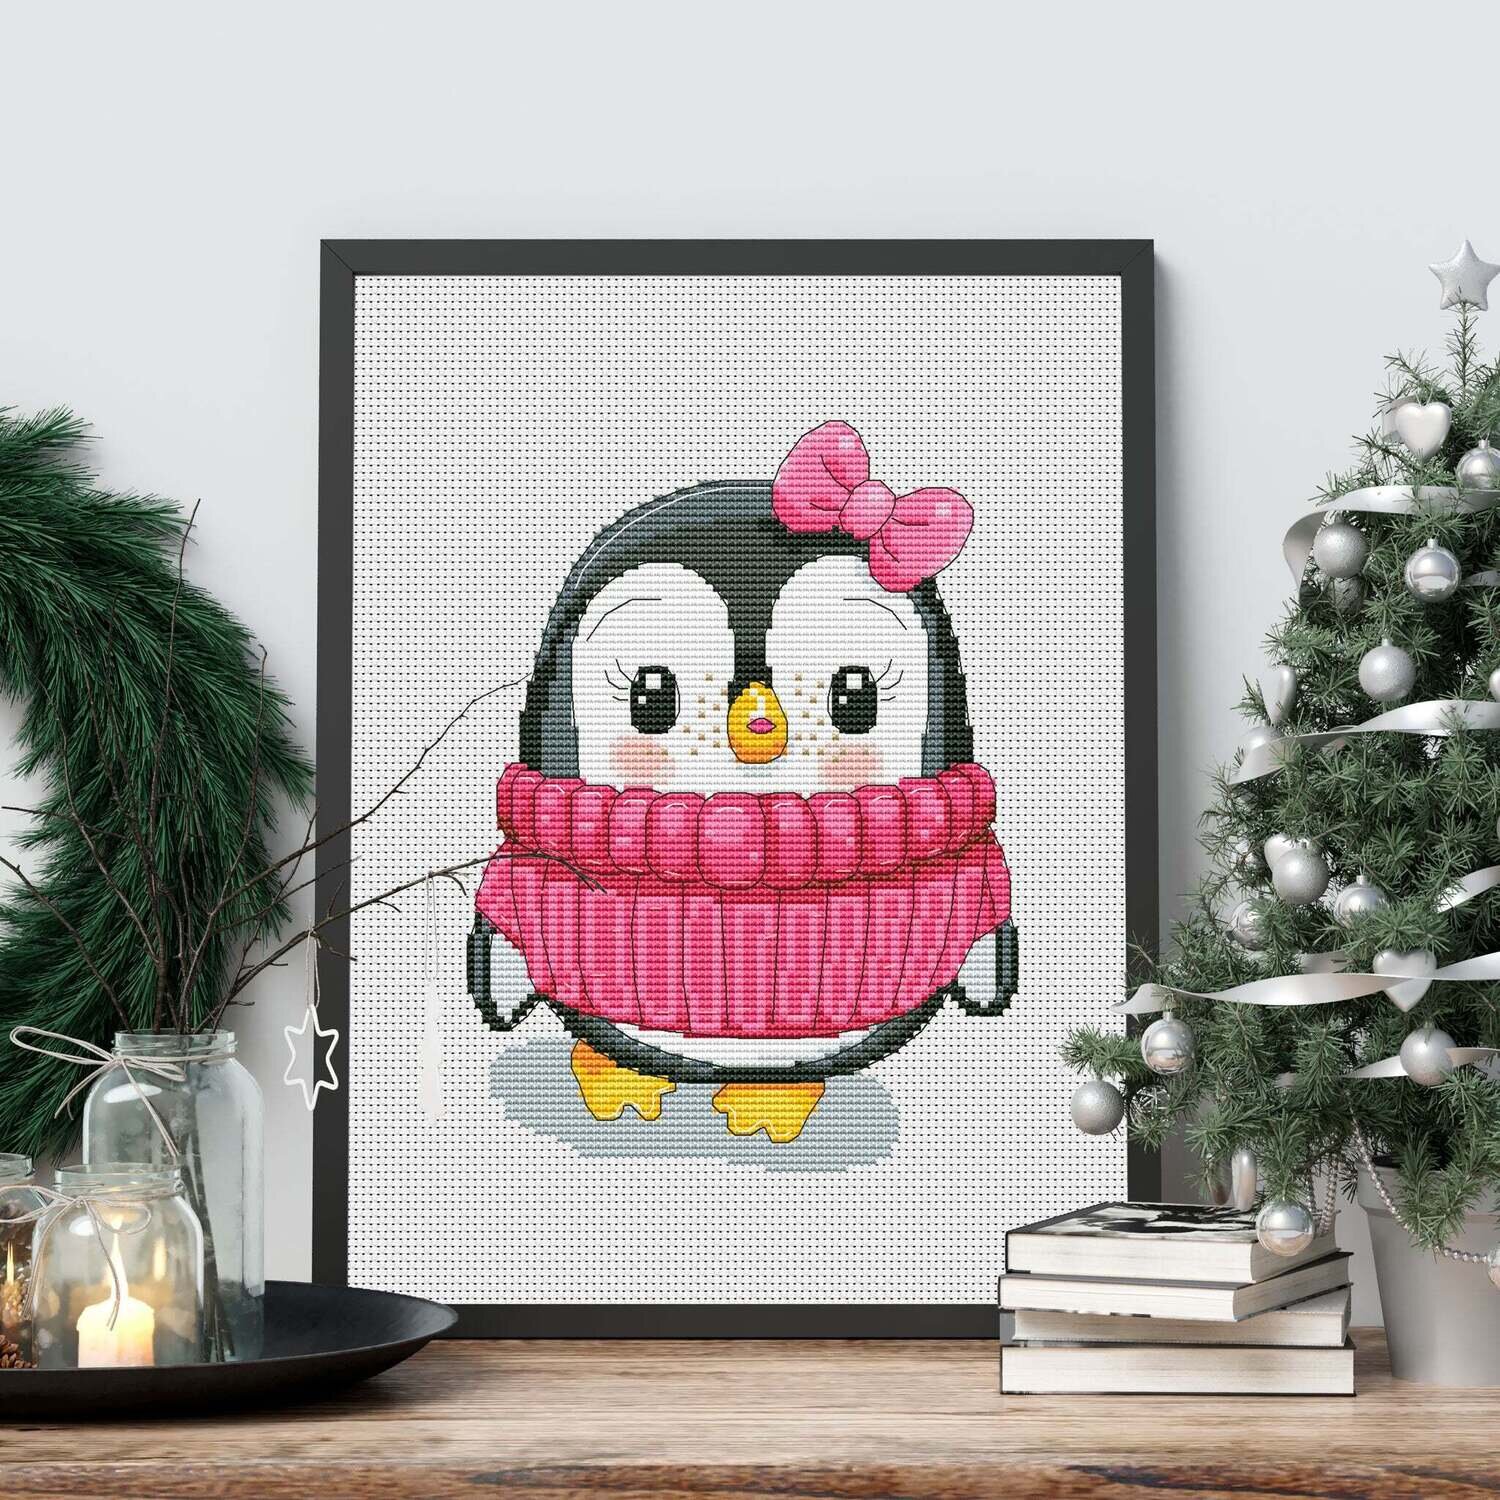 Penguin cross stitch, Christmas stitch, Counted cross stitch, Cross stitch pattern